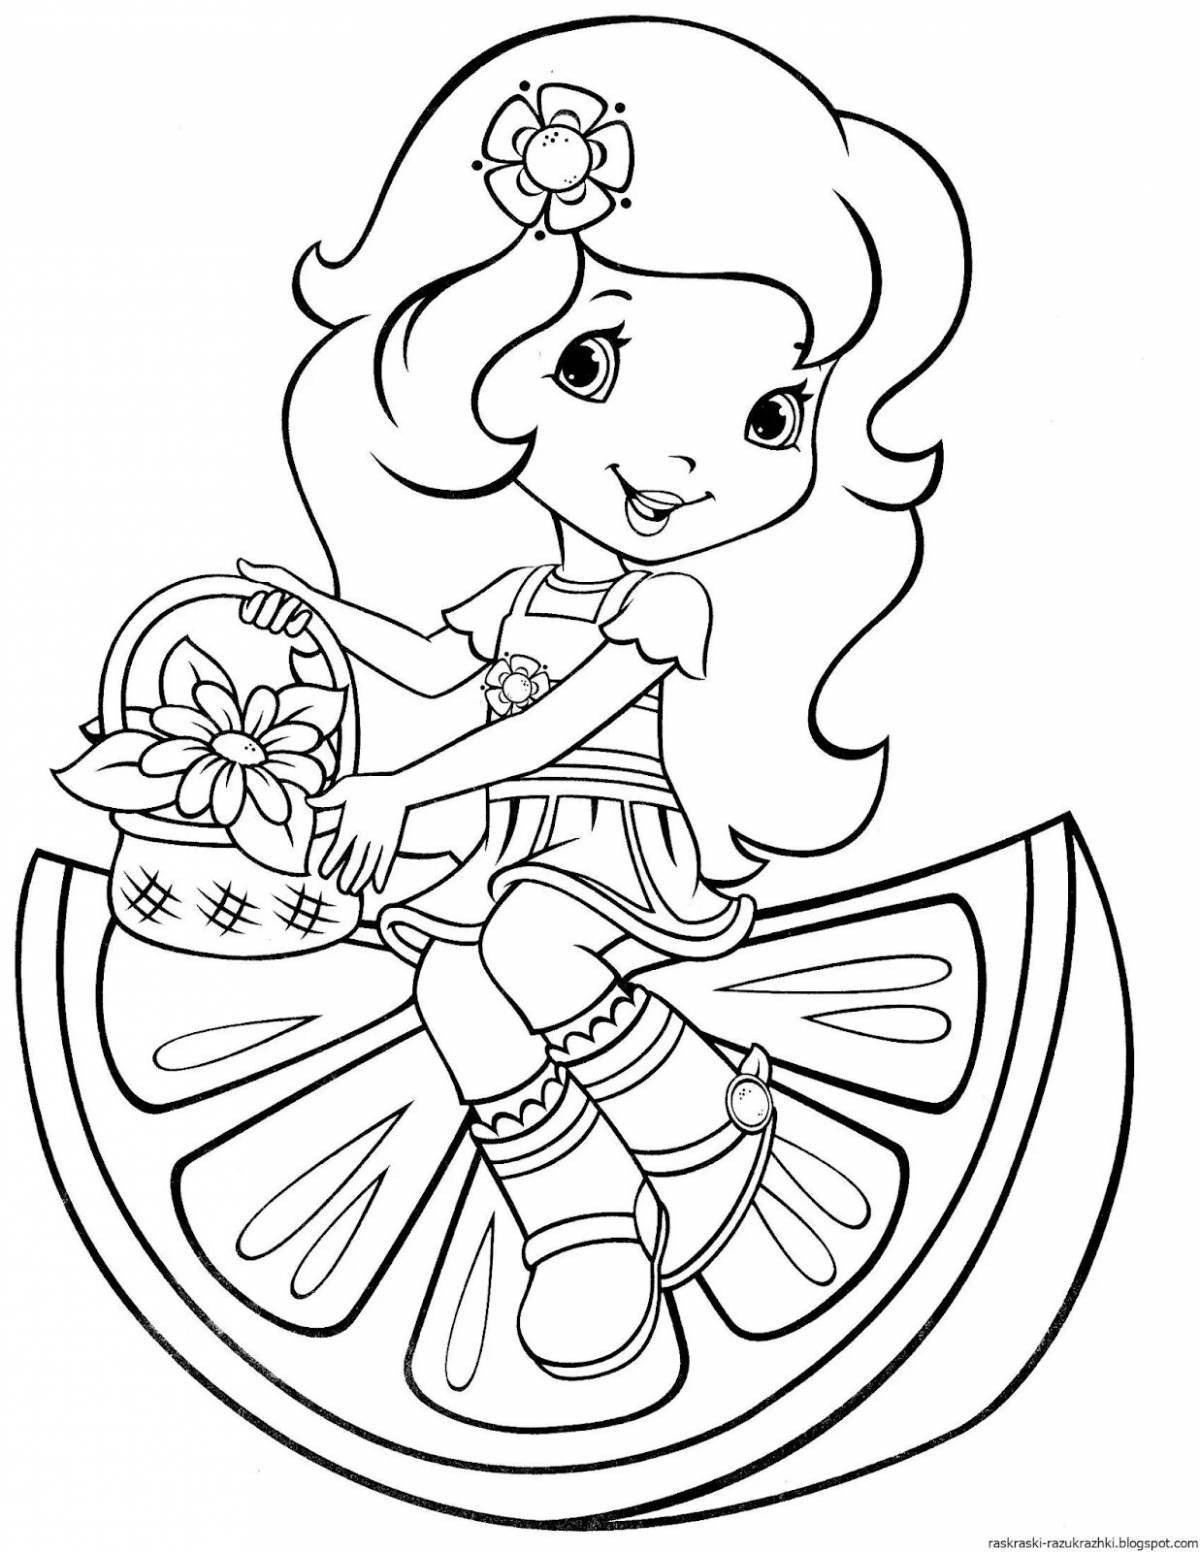 Playful princess coloring book for girls 4-5 years old